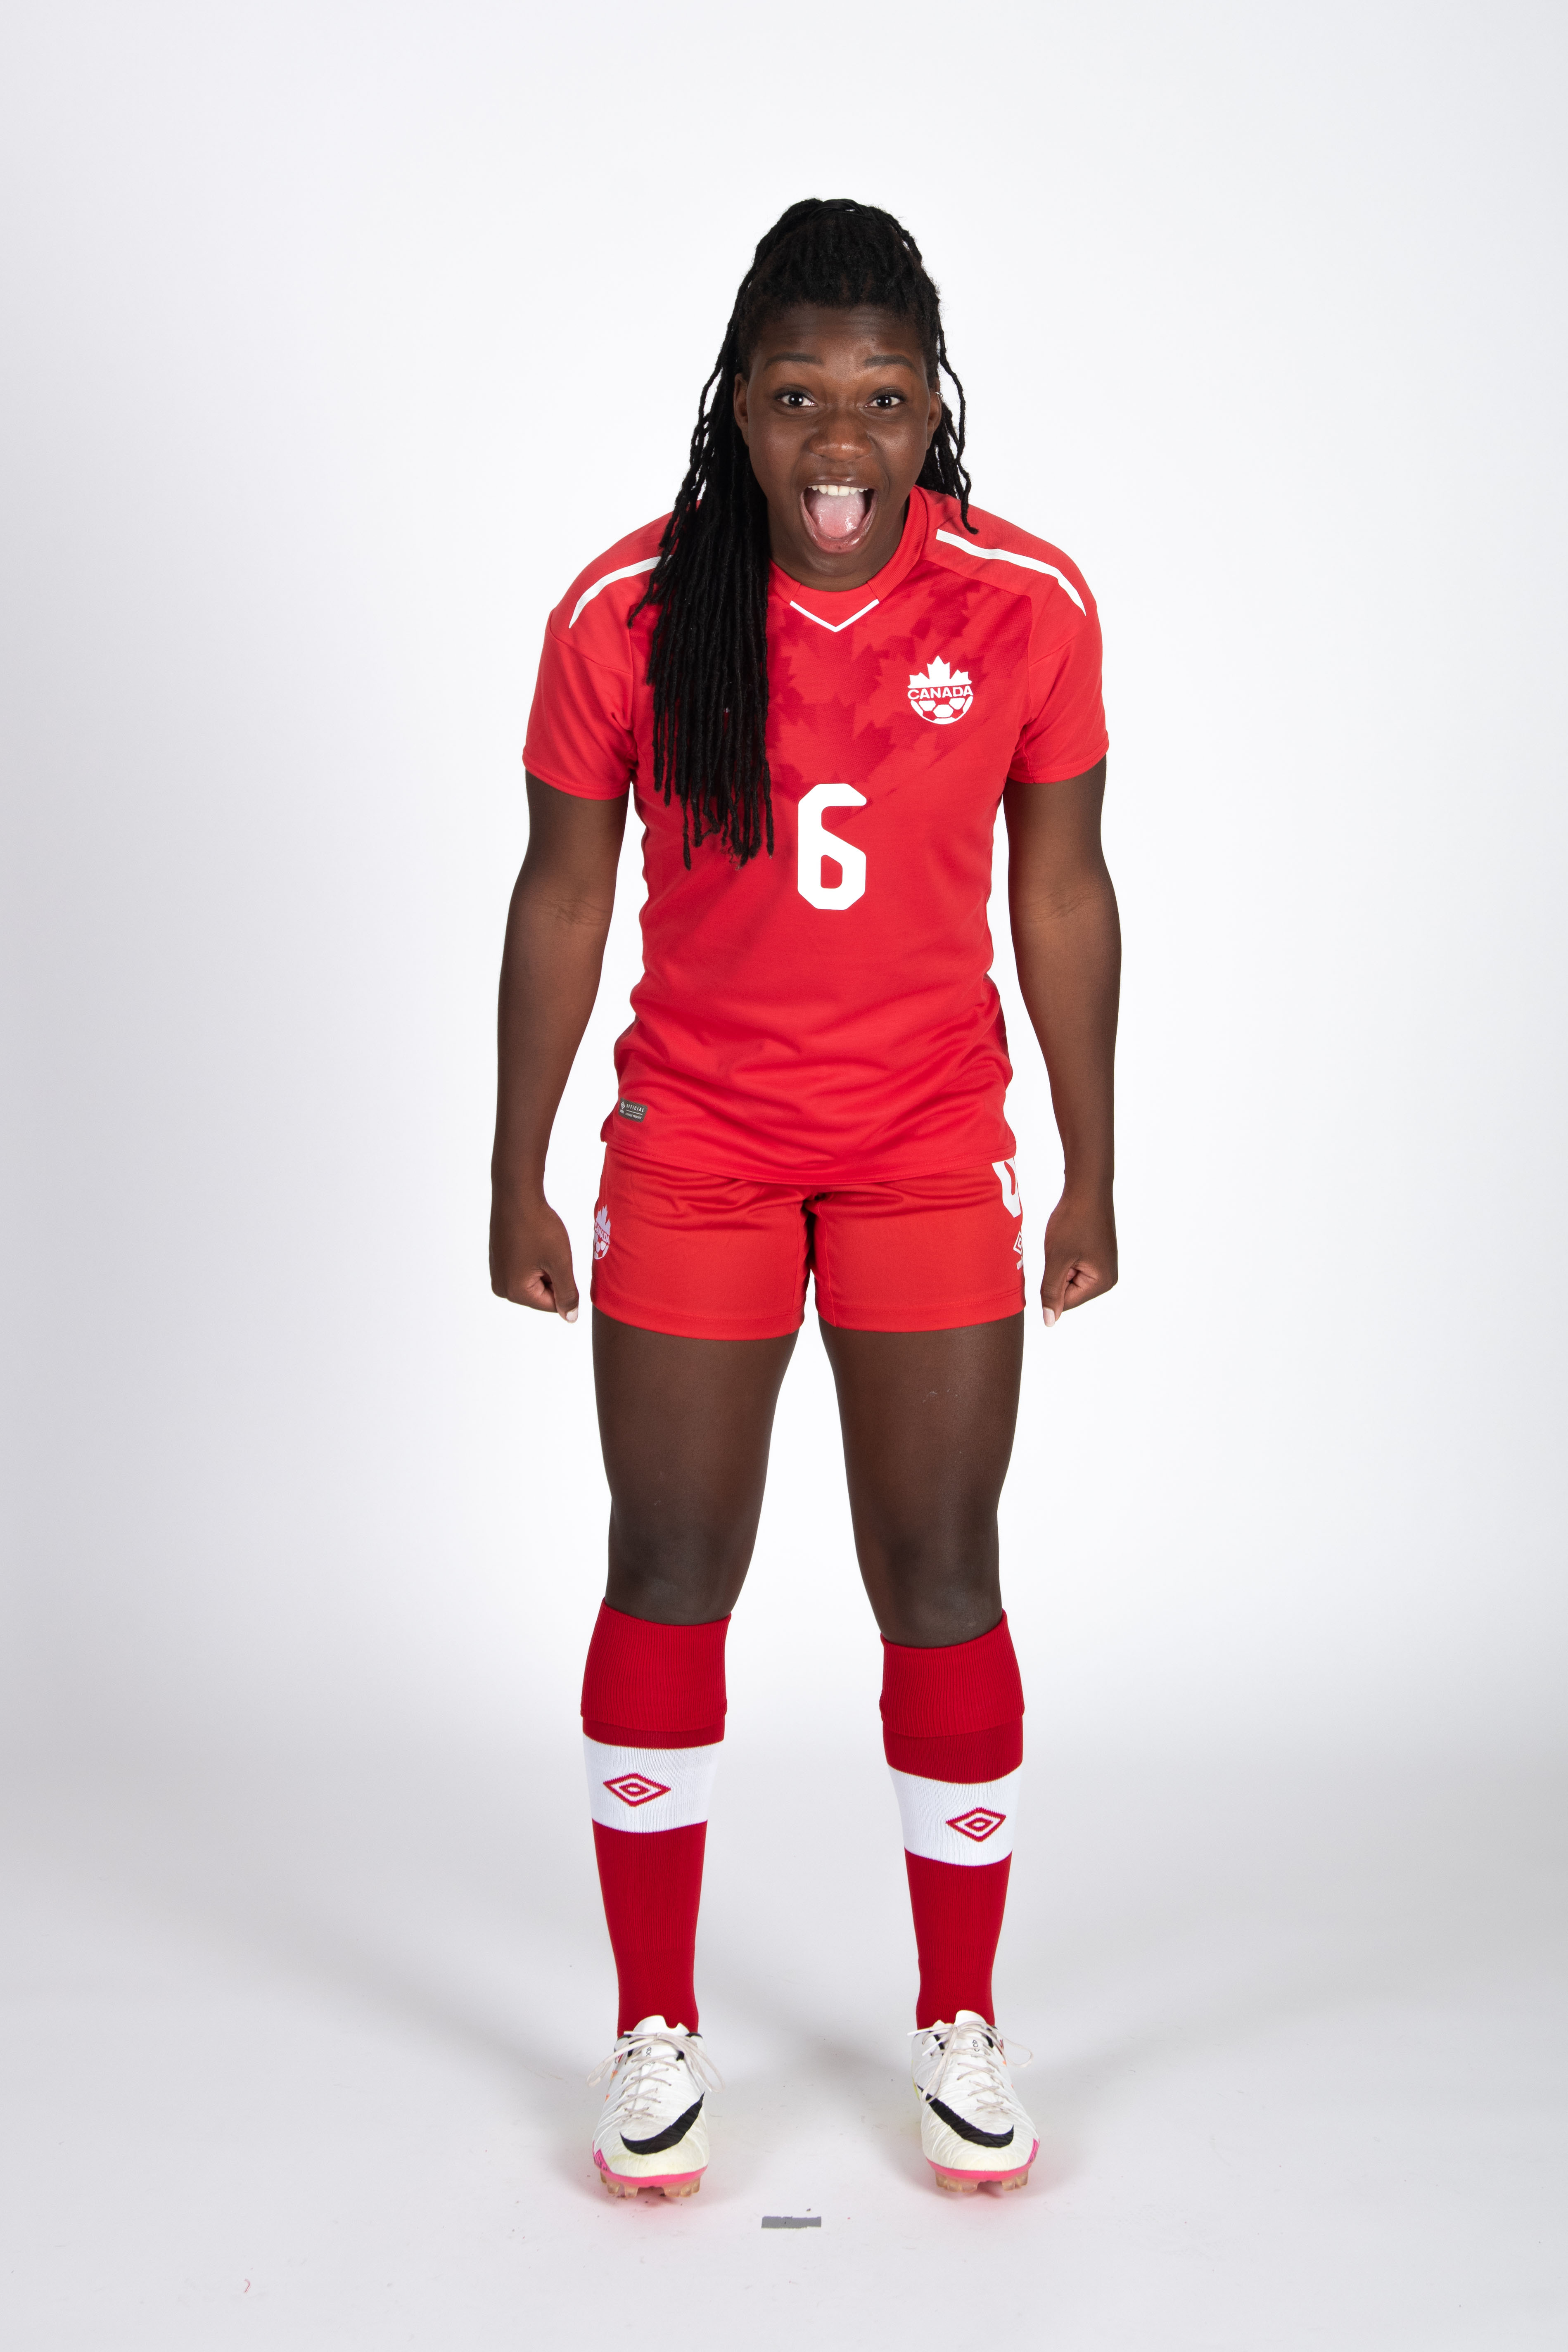 20180604_CANWNT_Rose_byBazyl14